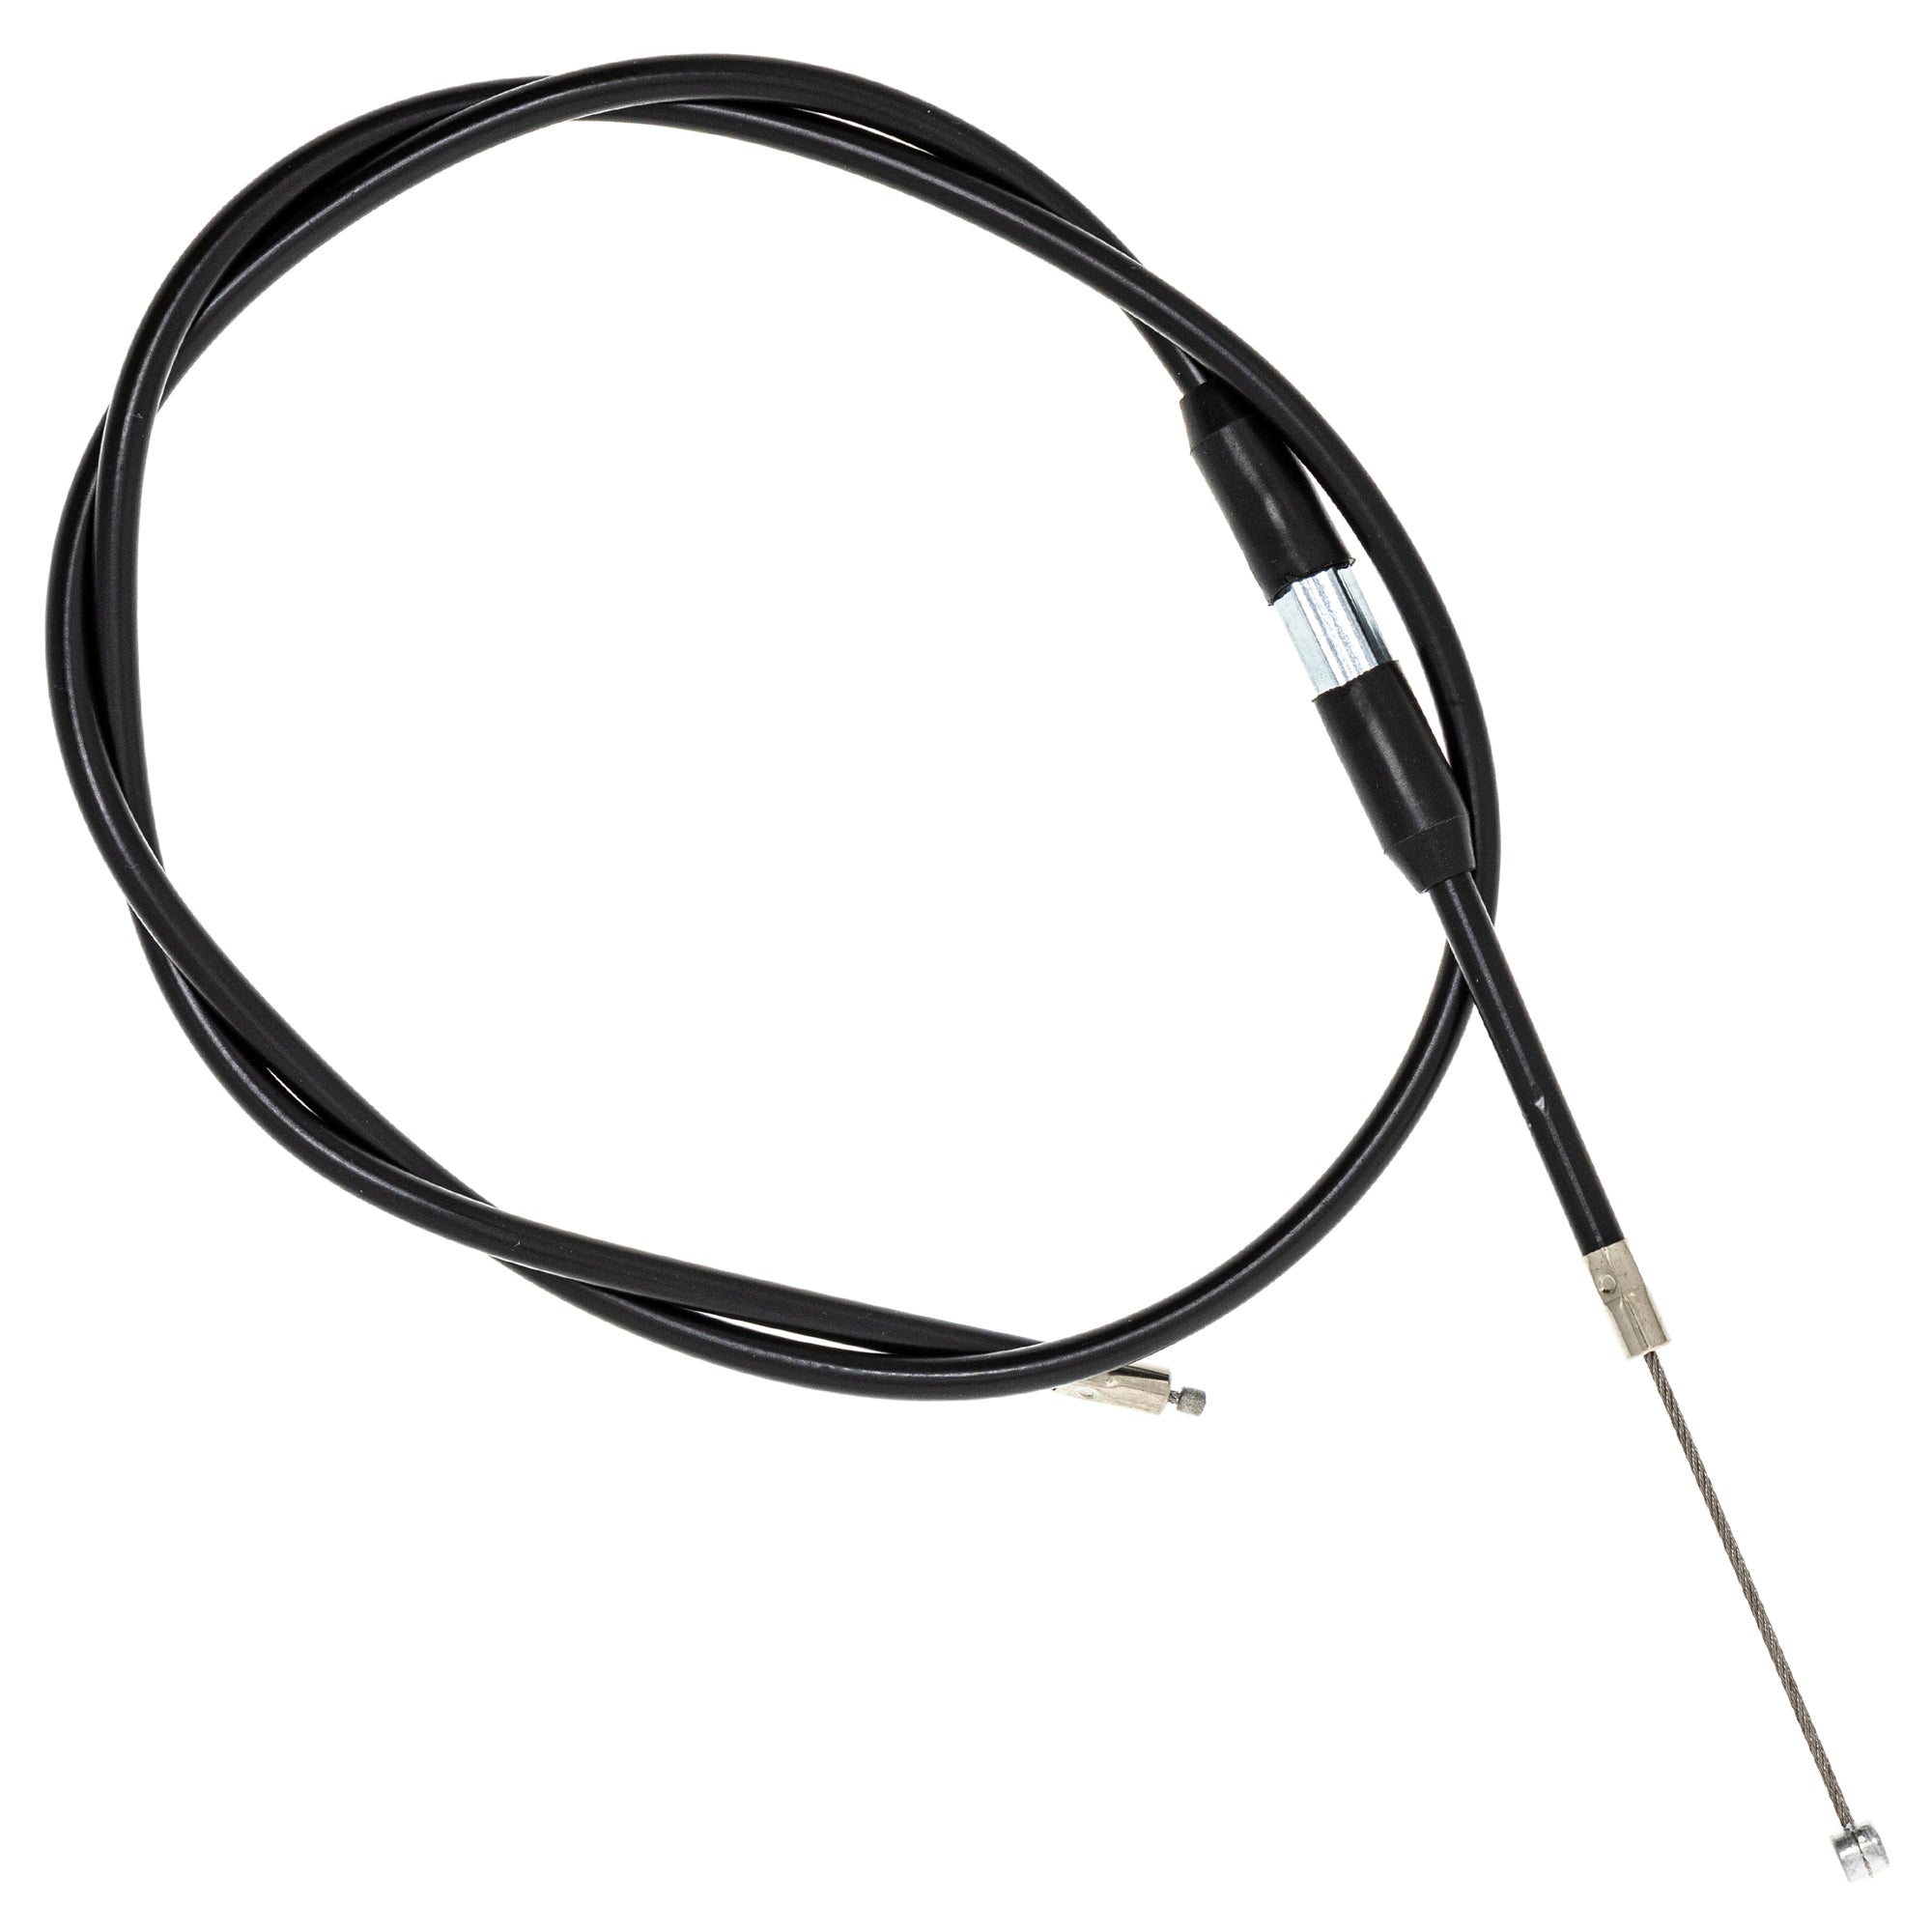 Hot Start Cable for zOTHER RMZ450Z RMZ450 NICHE 519-CCB2530L